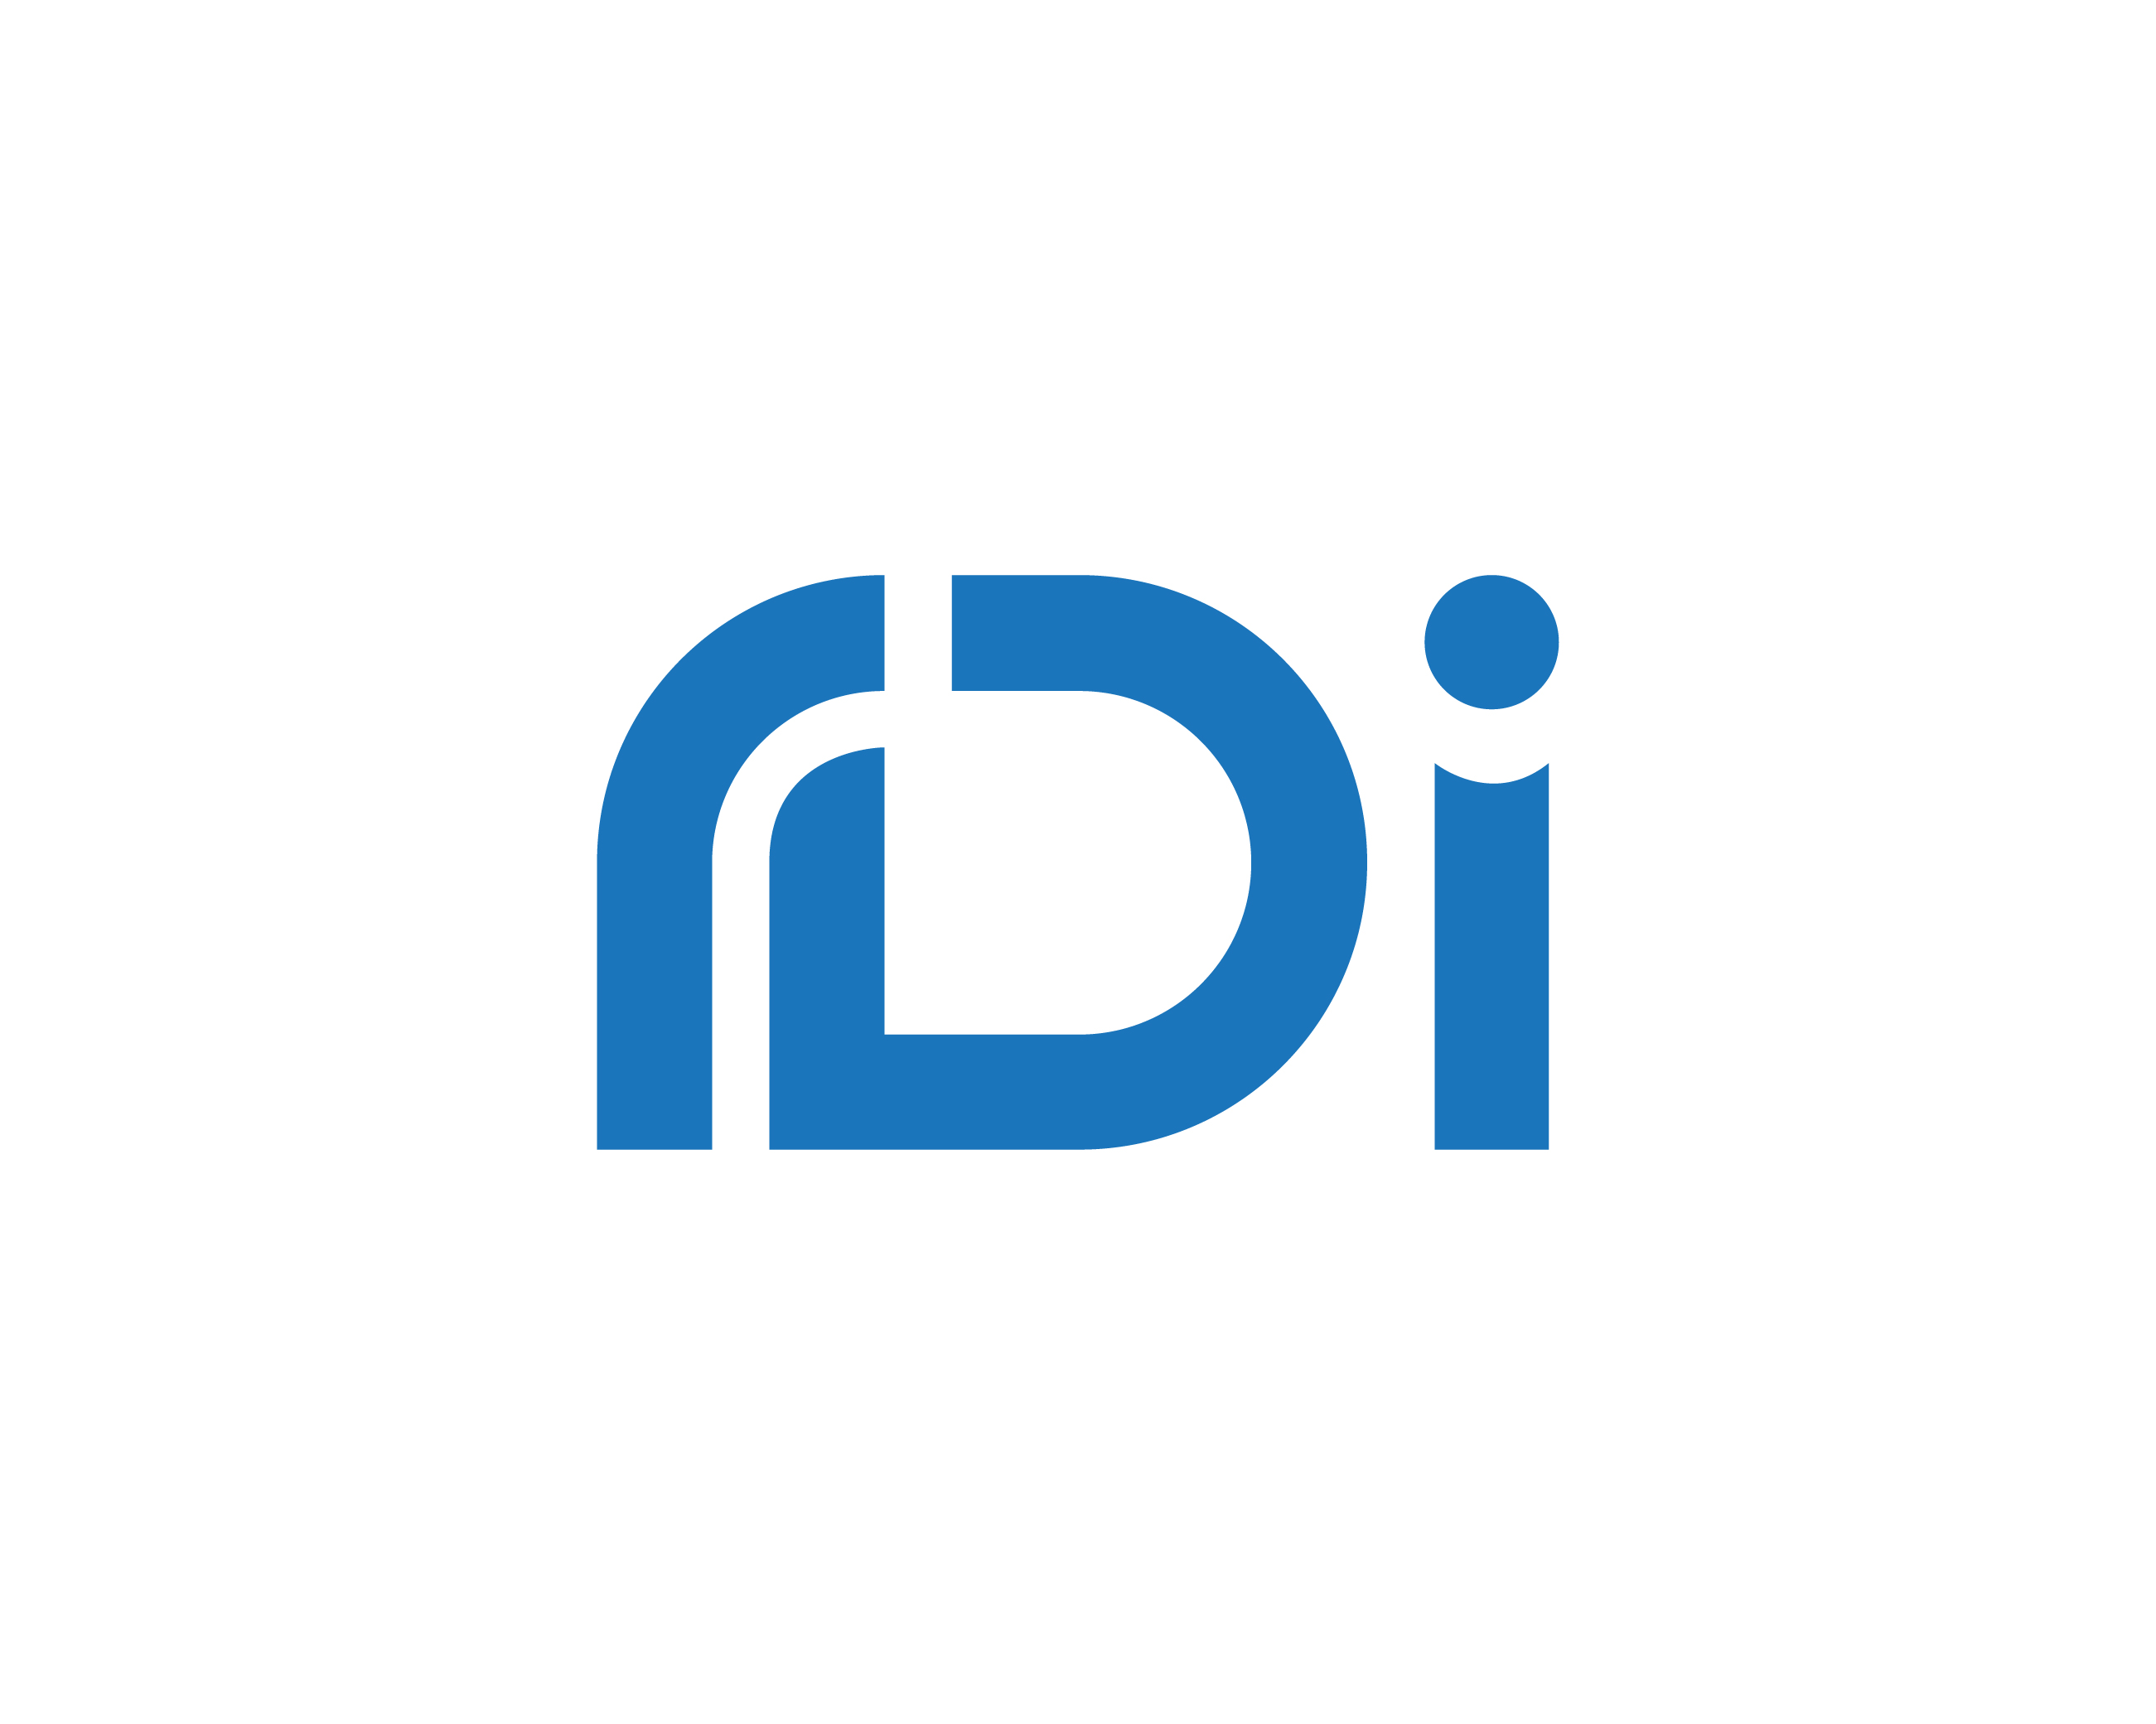 The Engineering Company for the Development of Digital Systems (RDI)